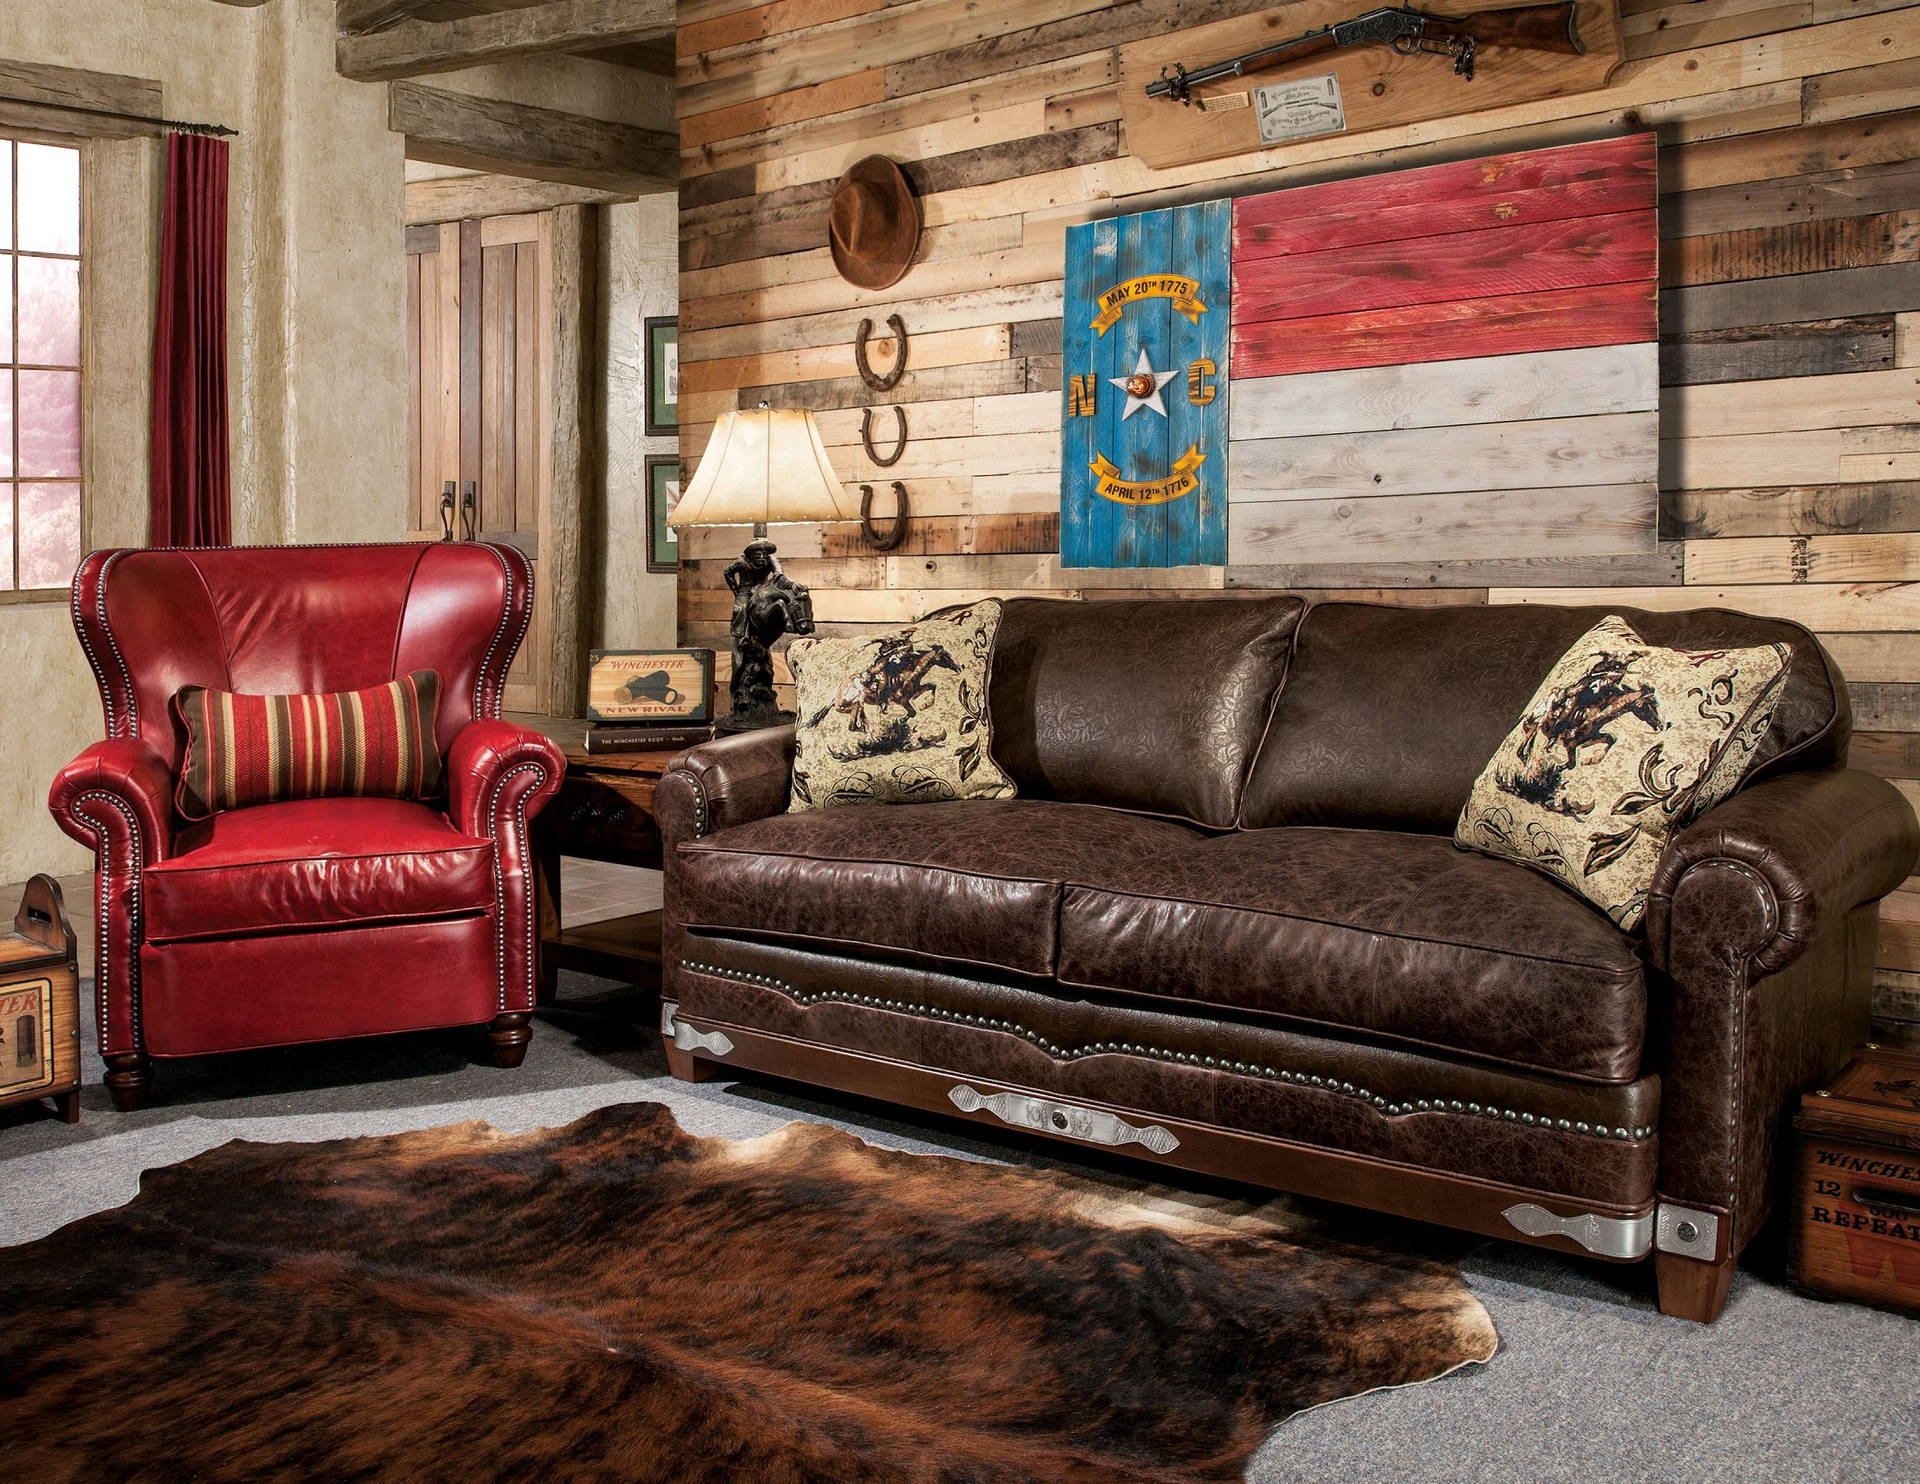 Classic Animal Leather Living Room Sofa Background